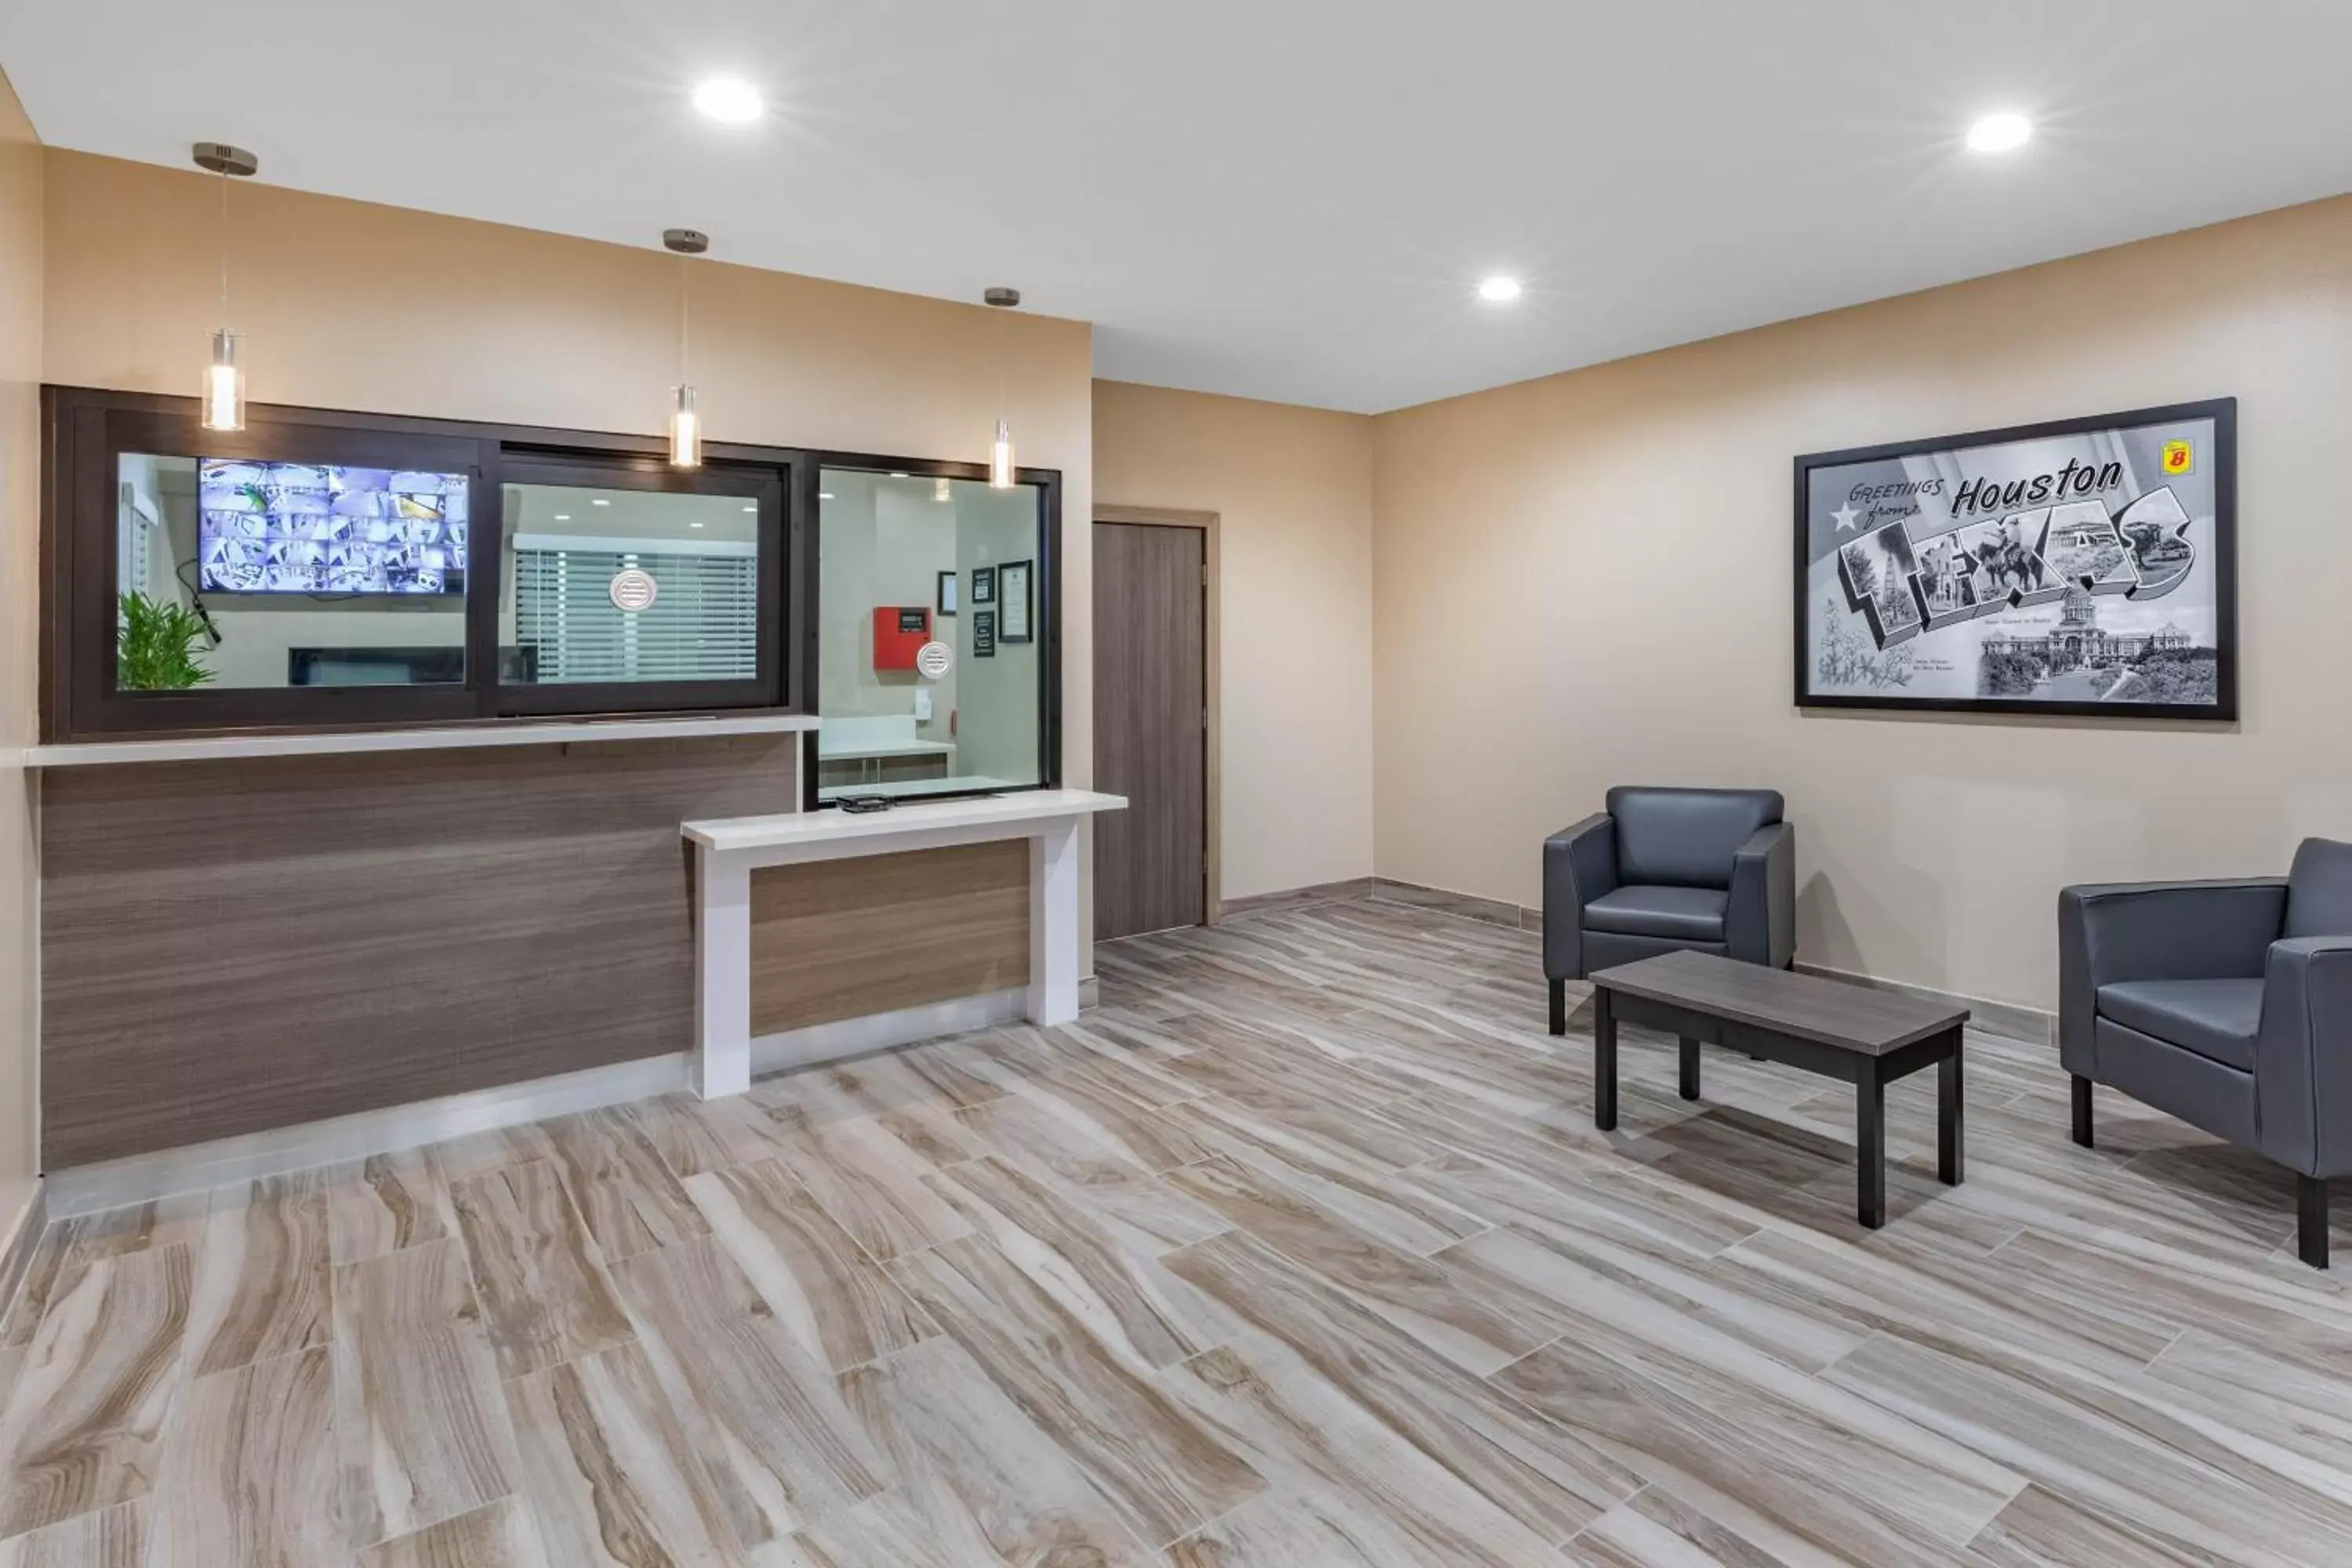 Lobby or reception in Super 8 by Wyndham Houston NW Beltway 8-West Rd